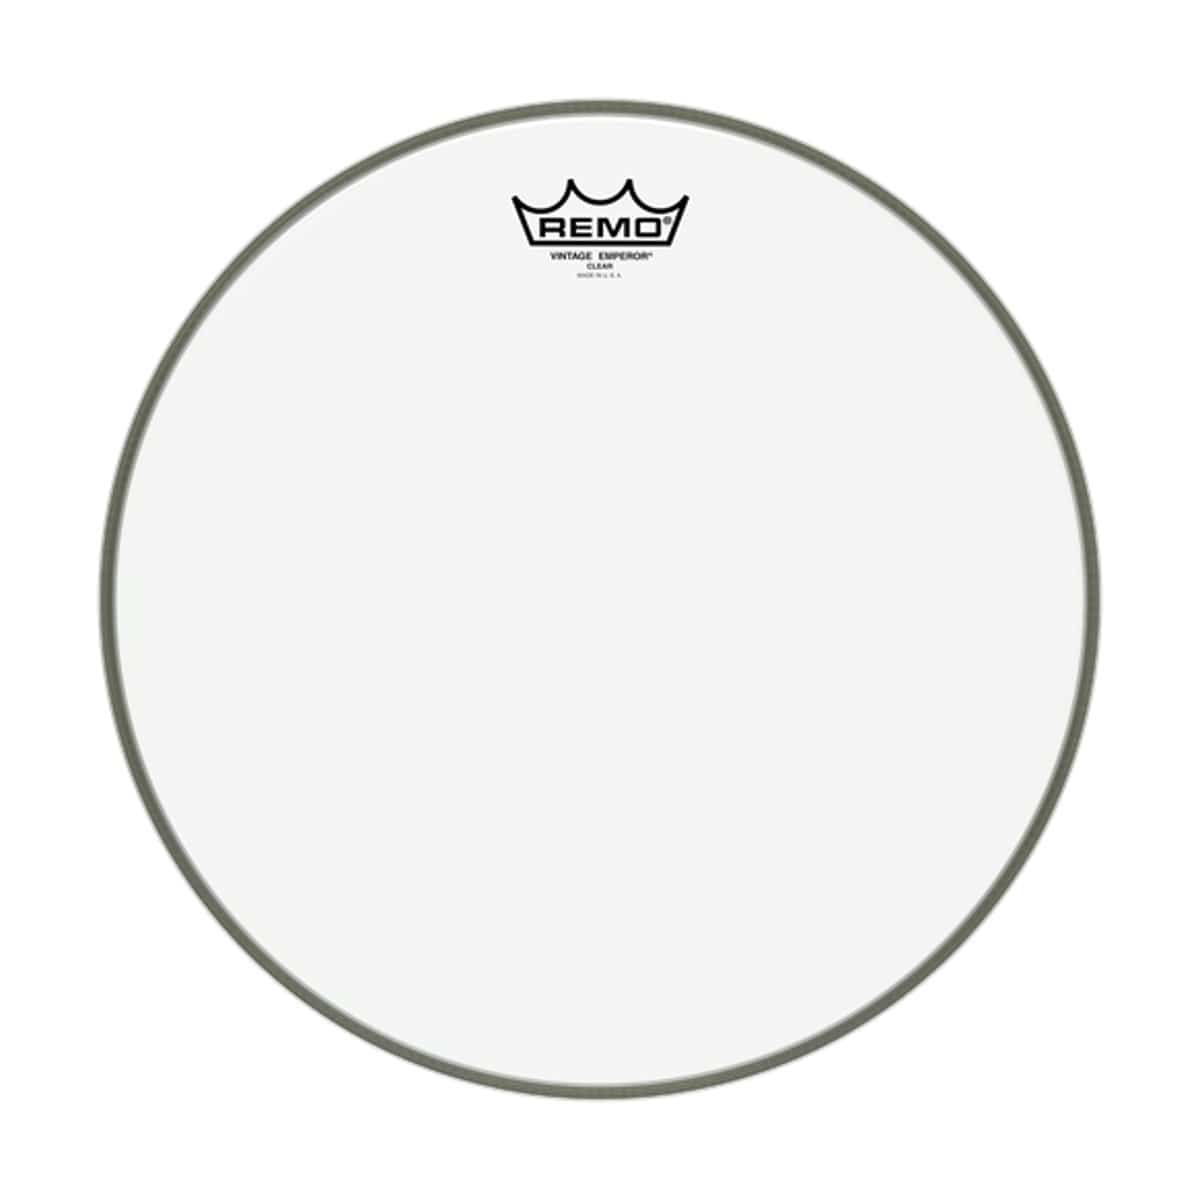 Remo Percussion Remo 14 Inch Drum Head Emperor Vintage Clear VE-0314-00 - Byron Music